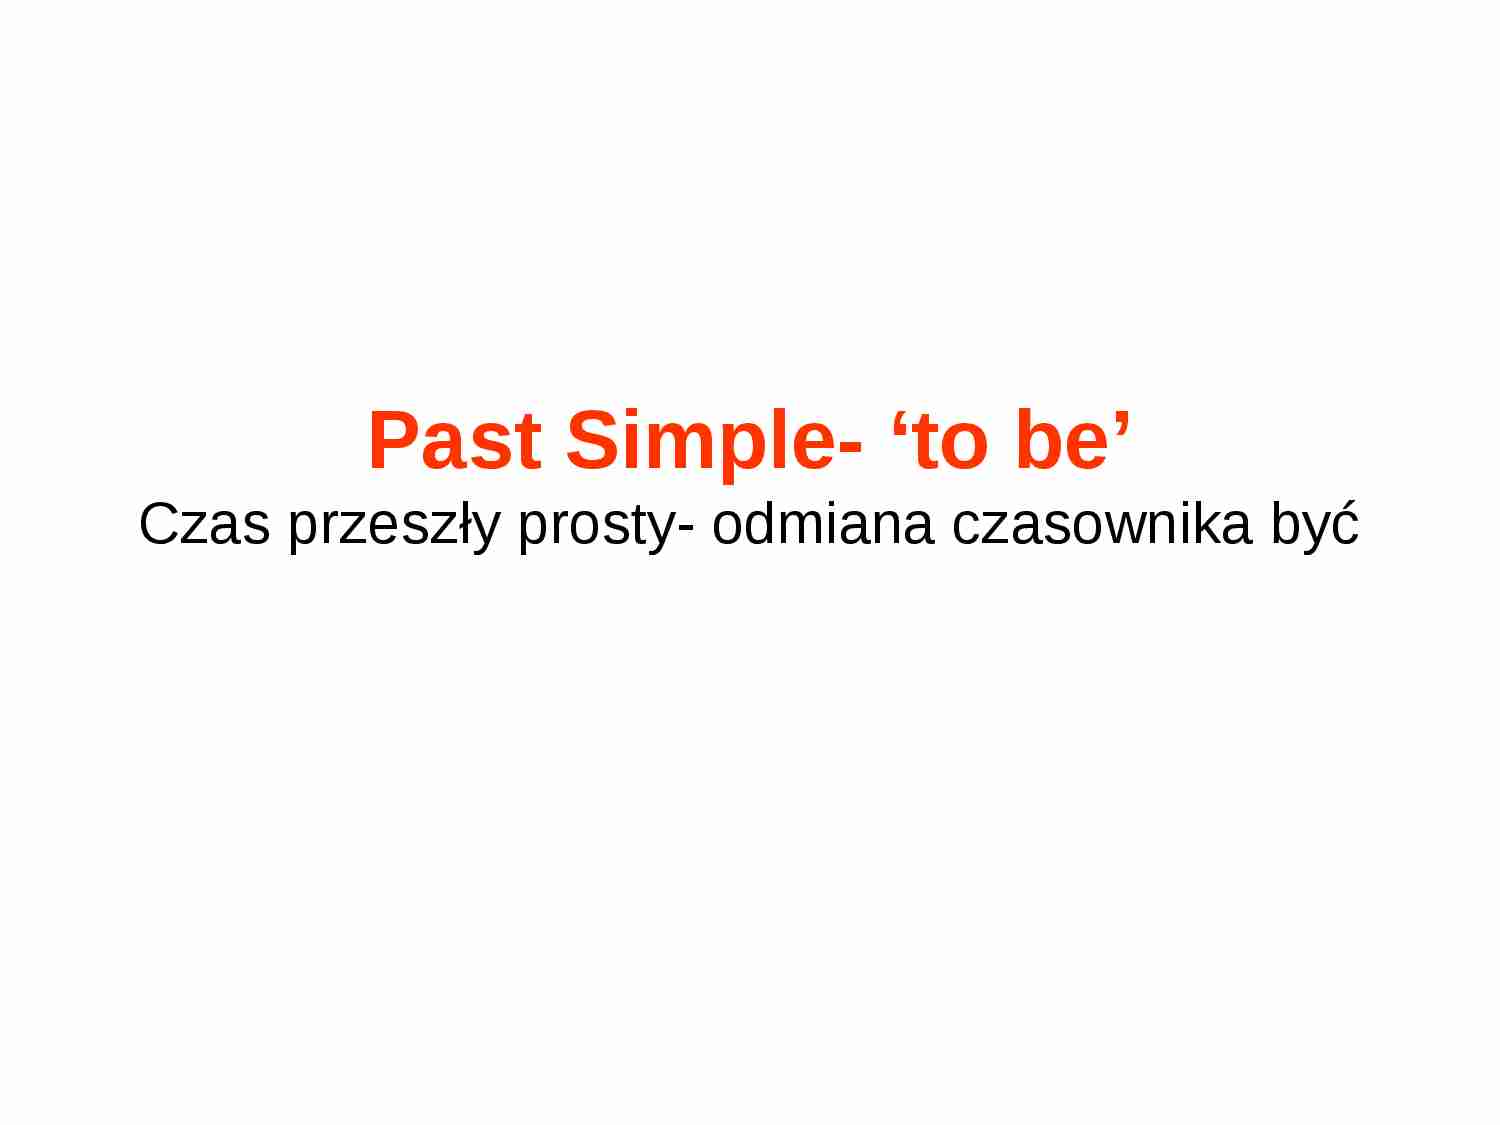 Past Simple - to be - strona 1